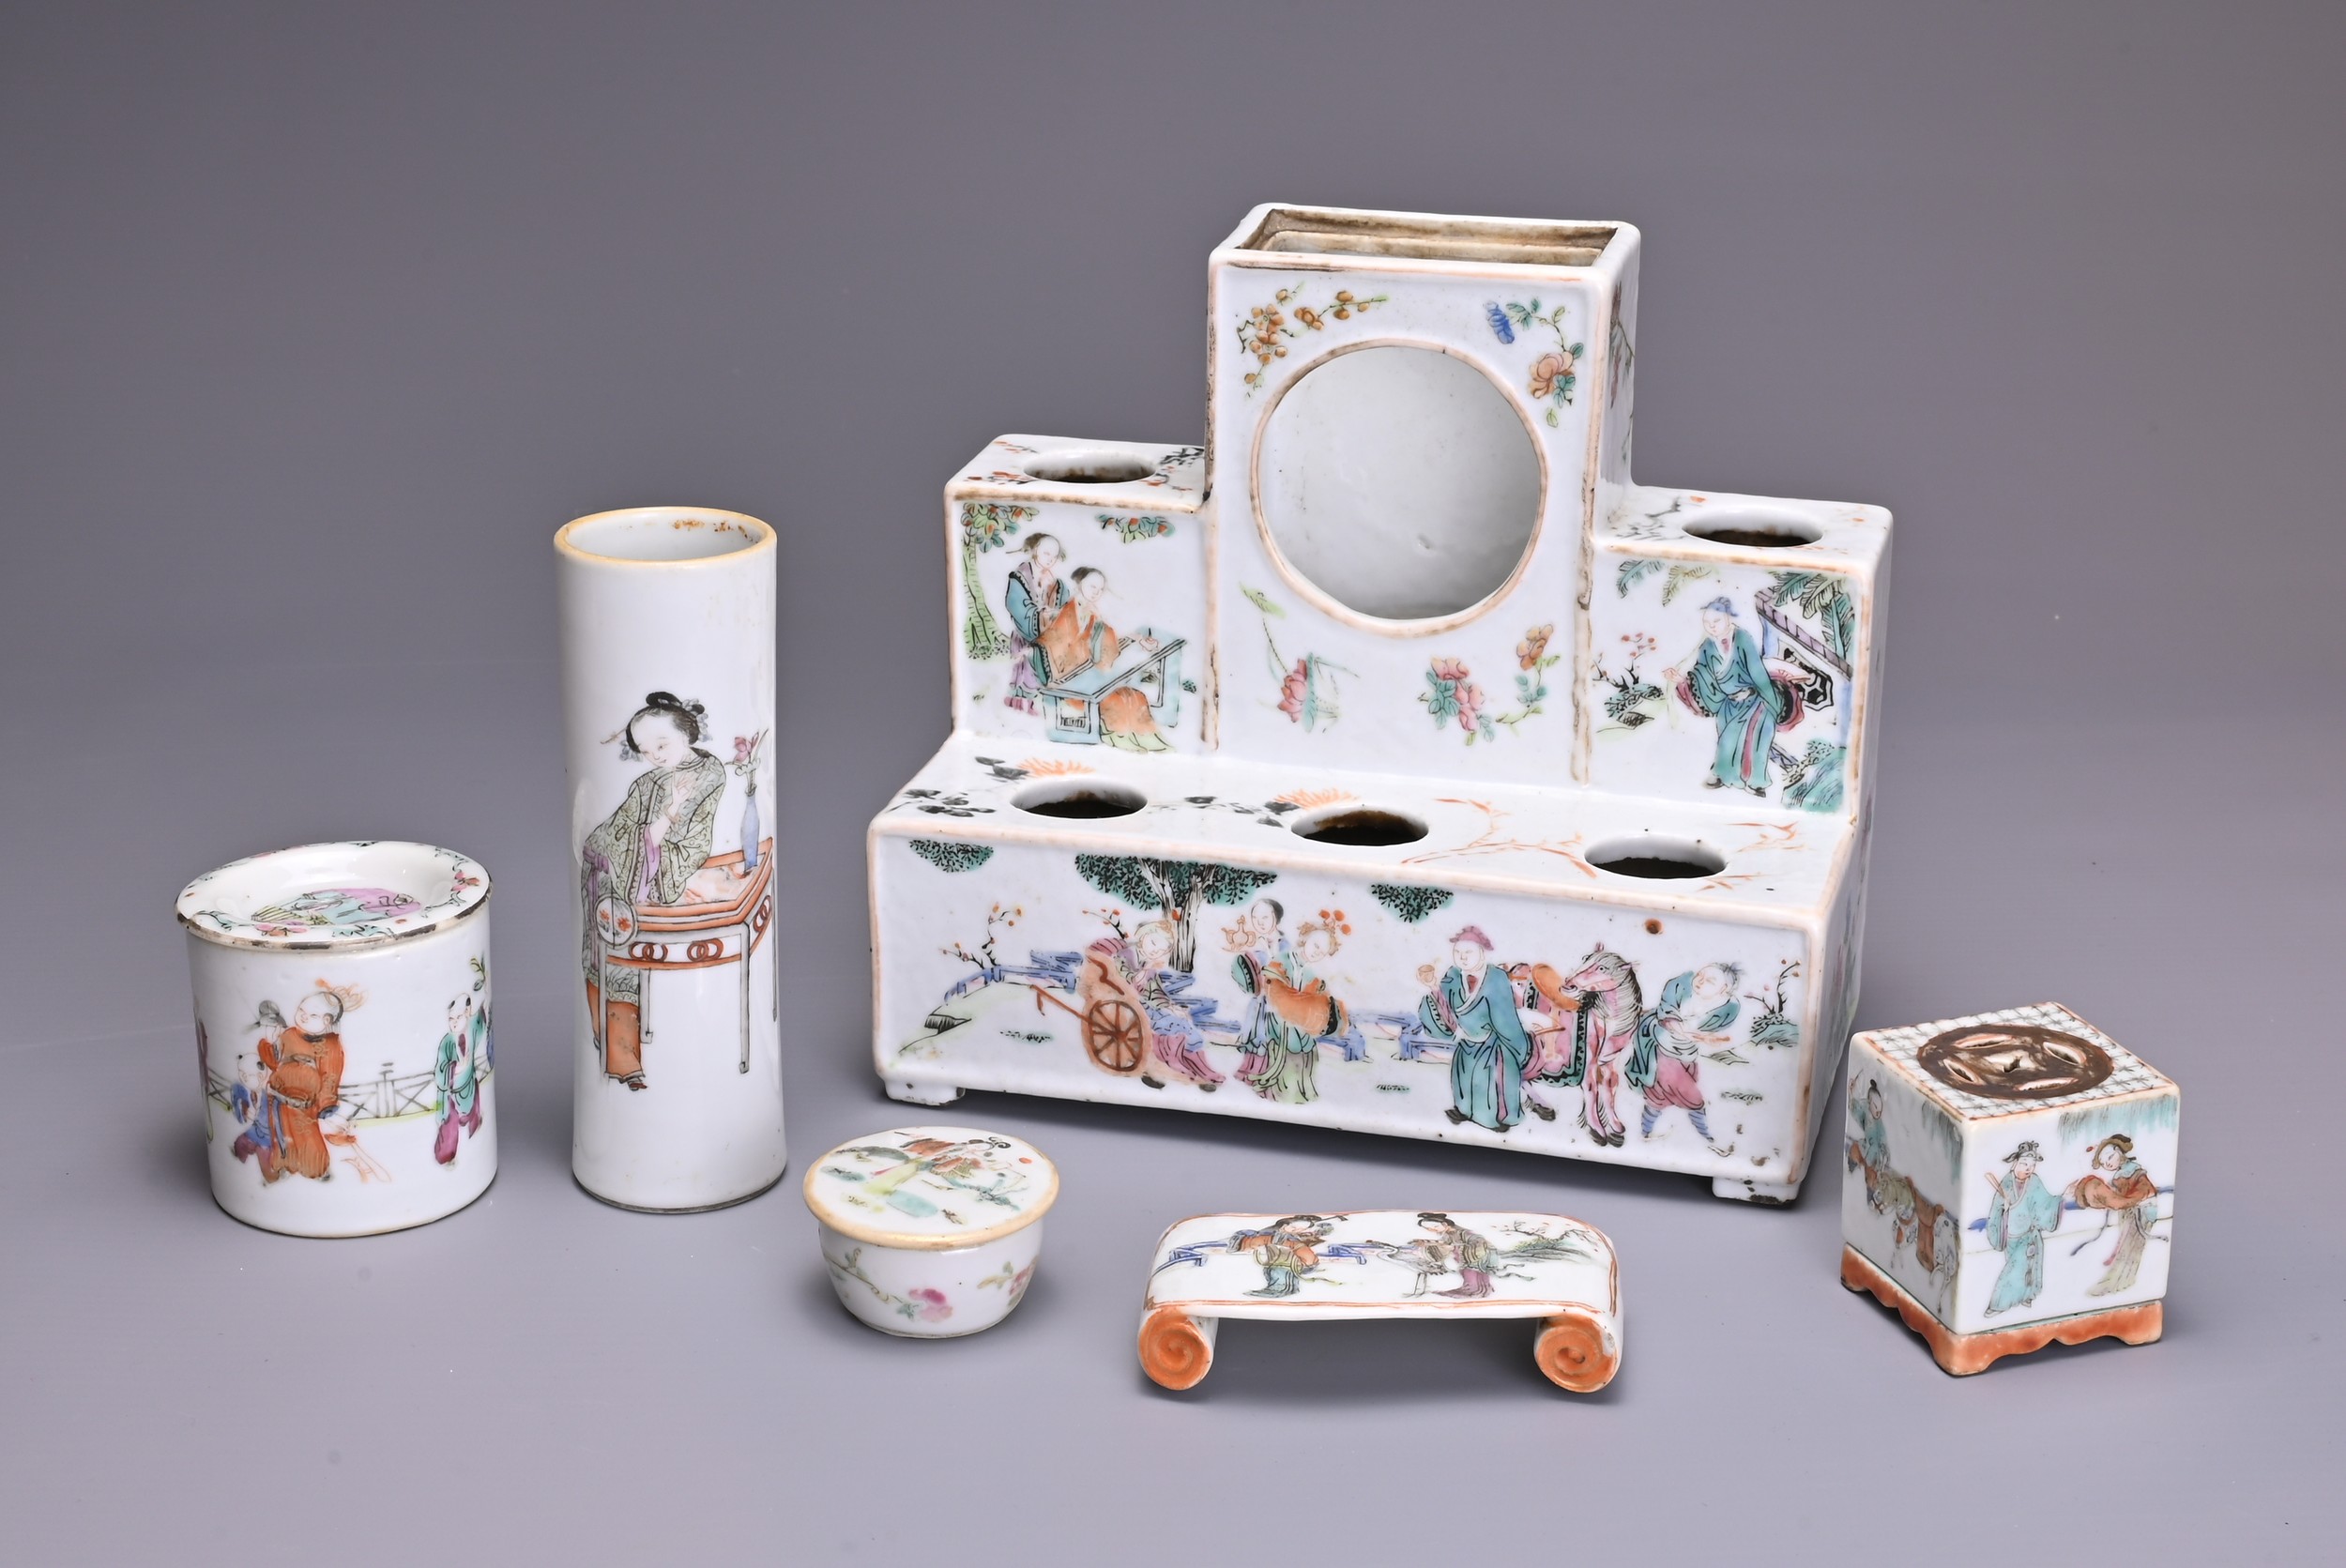 A GROUP OF CHINESE FAMILLE ROSE PORCELAIN ITEMS, 19TH CENTURY. Comprising a table stand for ink